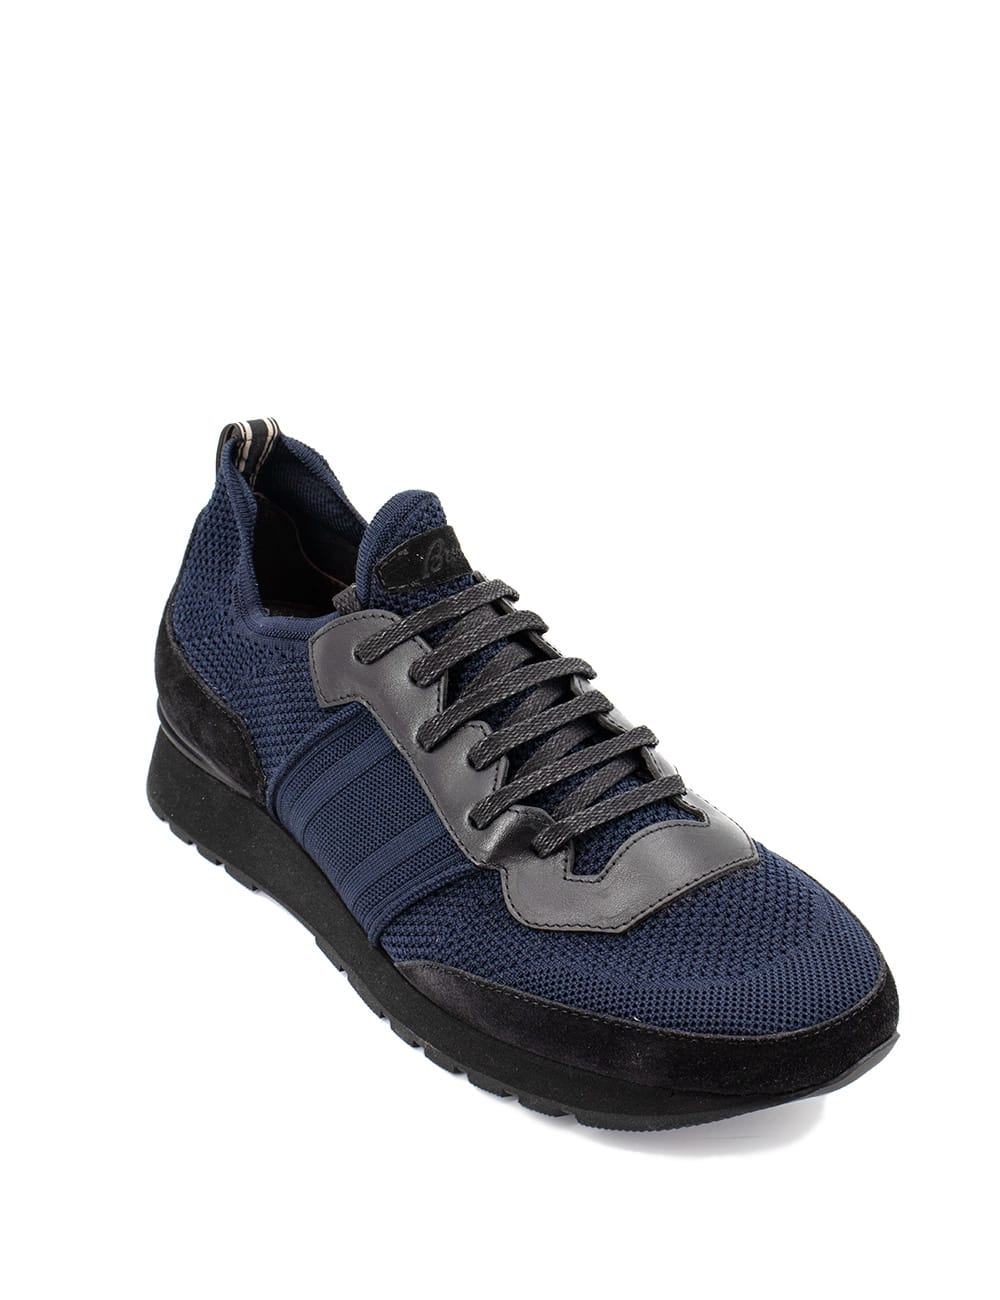 Shop Brioni Sneakers In All Navy